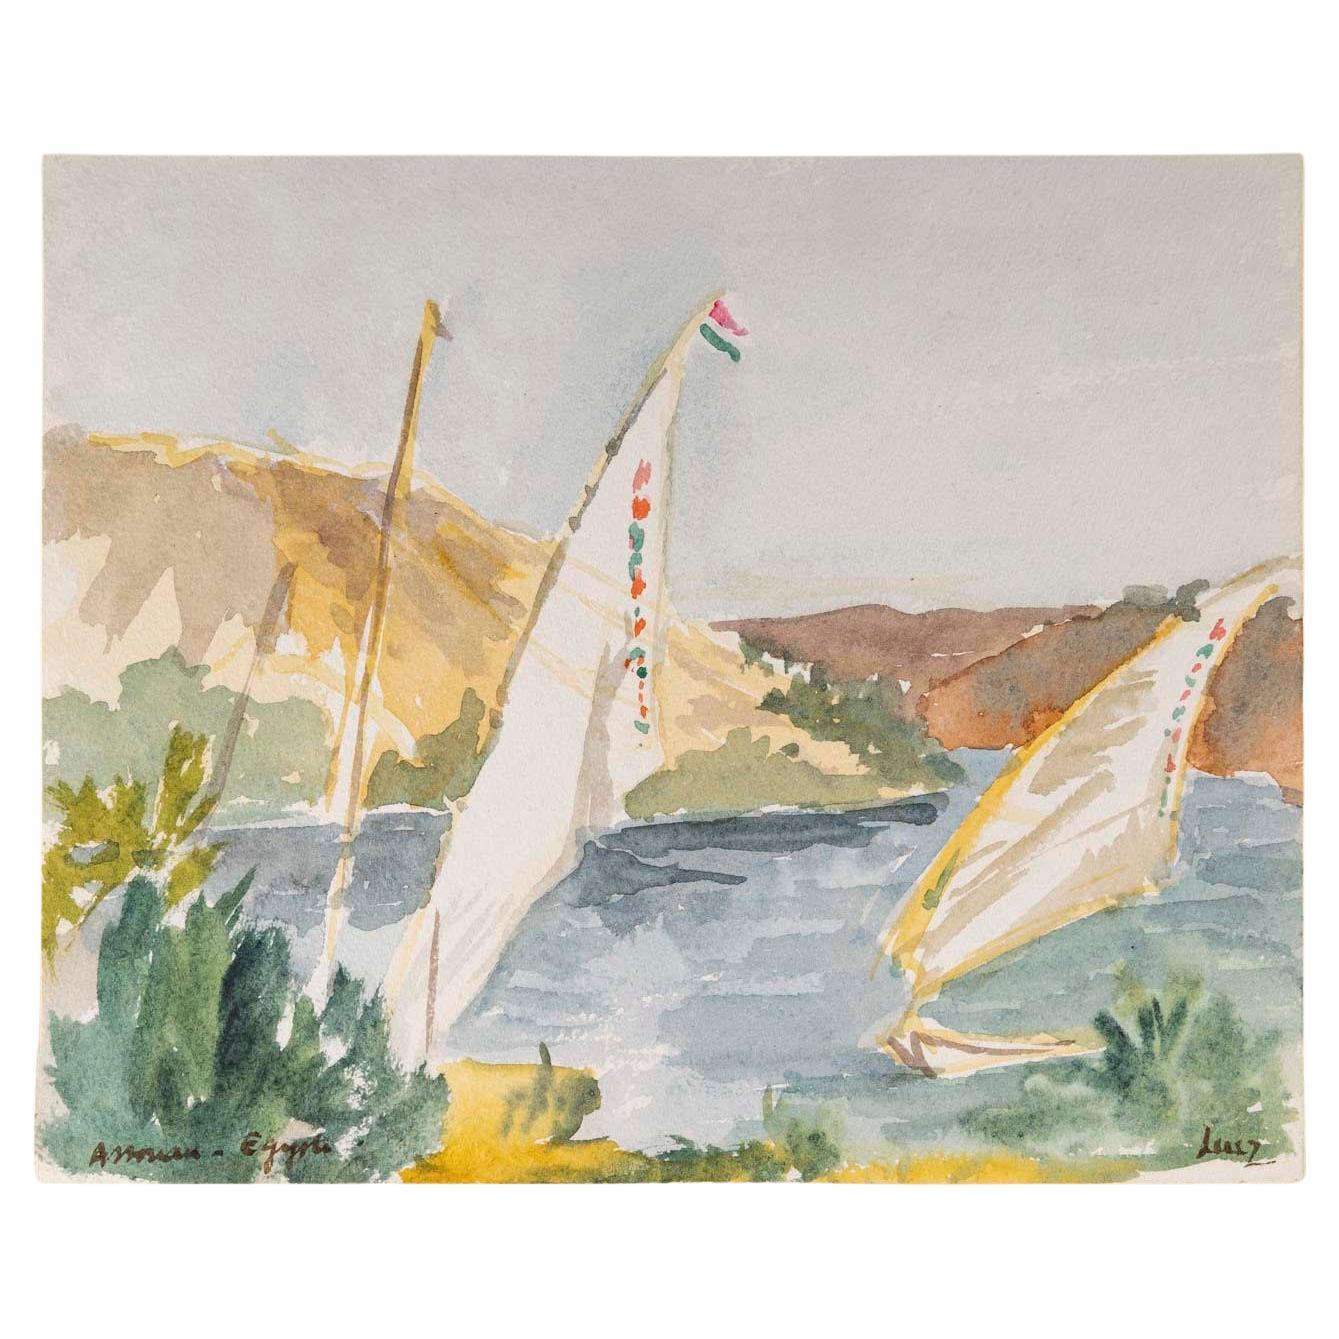 Watercolour Drawing on Paper by Evelyne Luez, 1960-80.